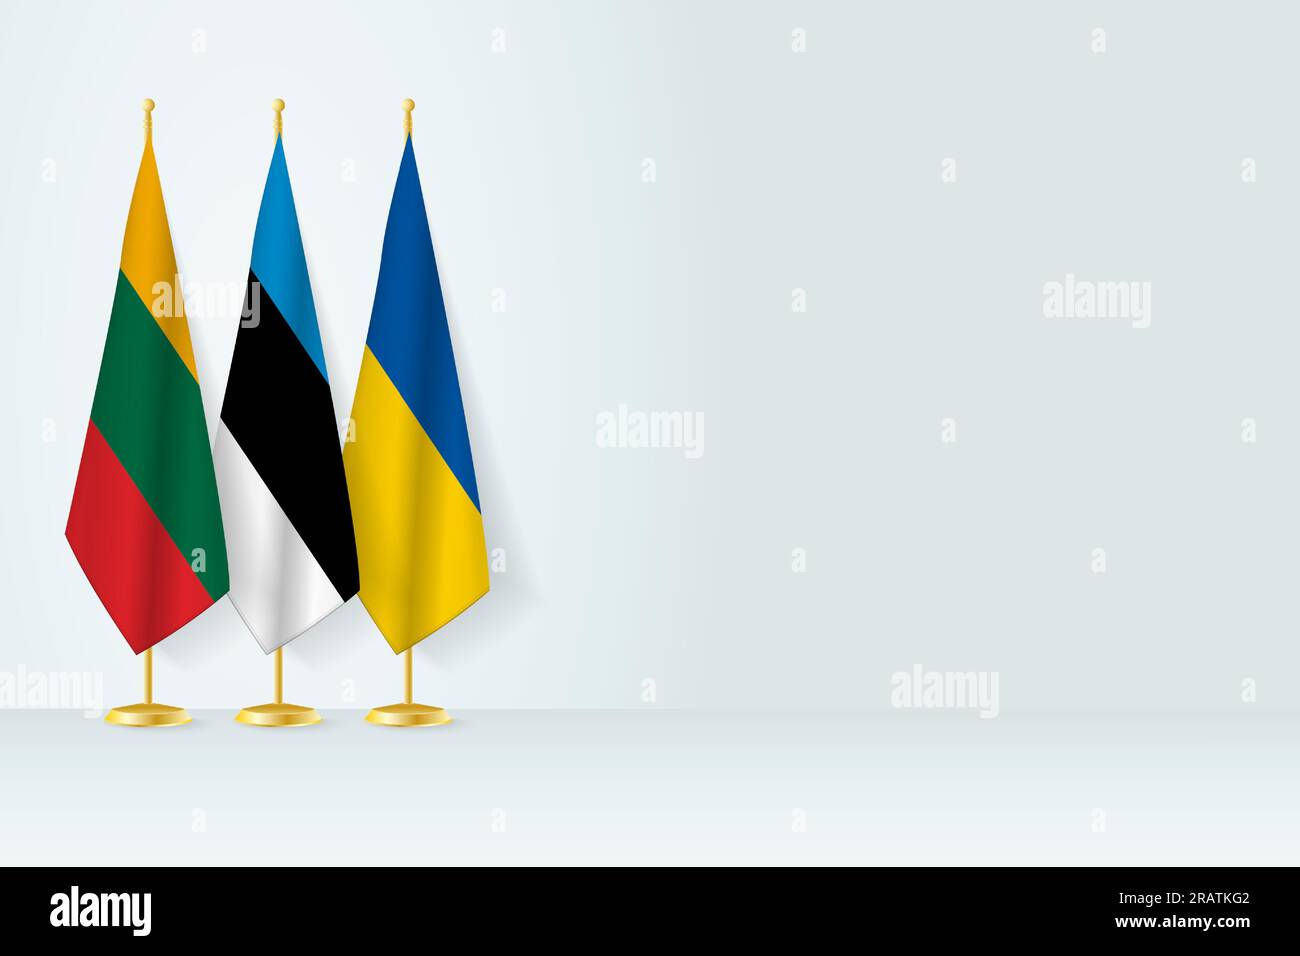 Flags of Lithuania, Estonia and Ukraine stand in row on indoor flagpole.  Vector illustration. Stock Vector